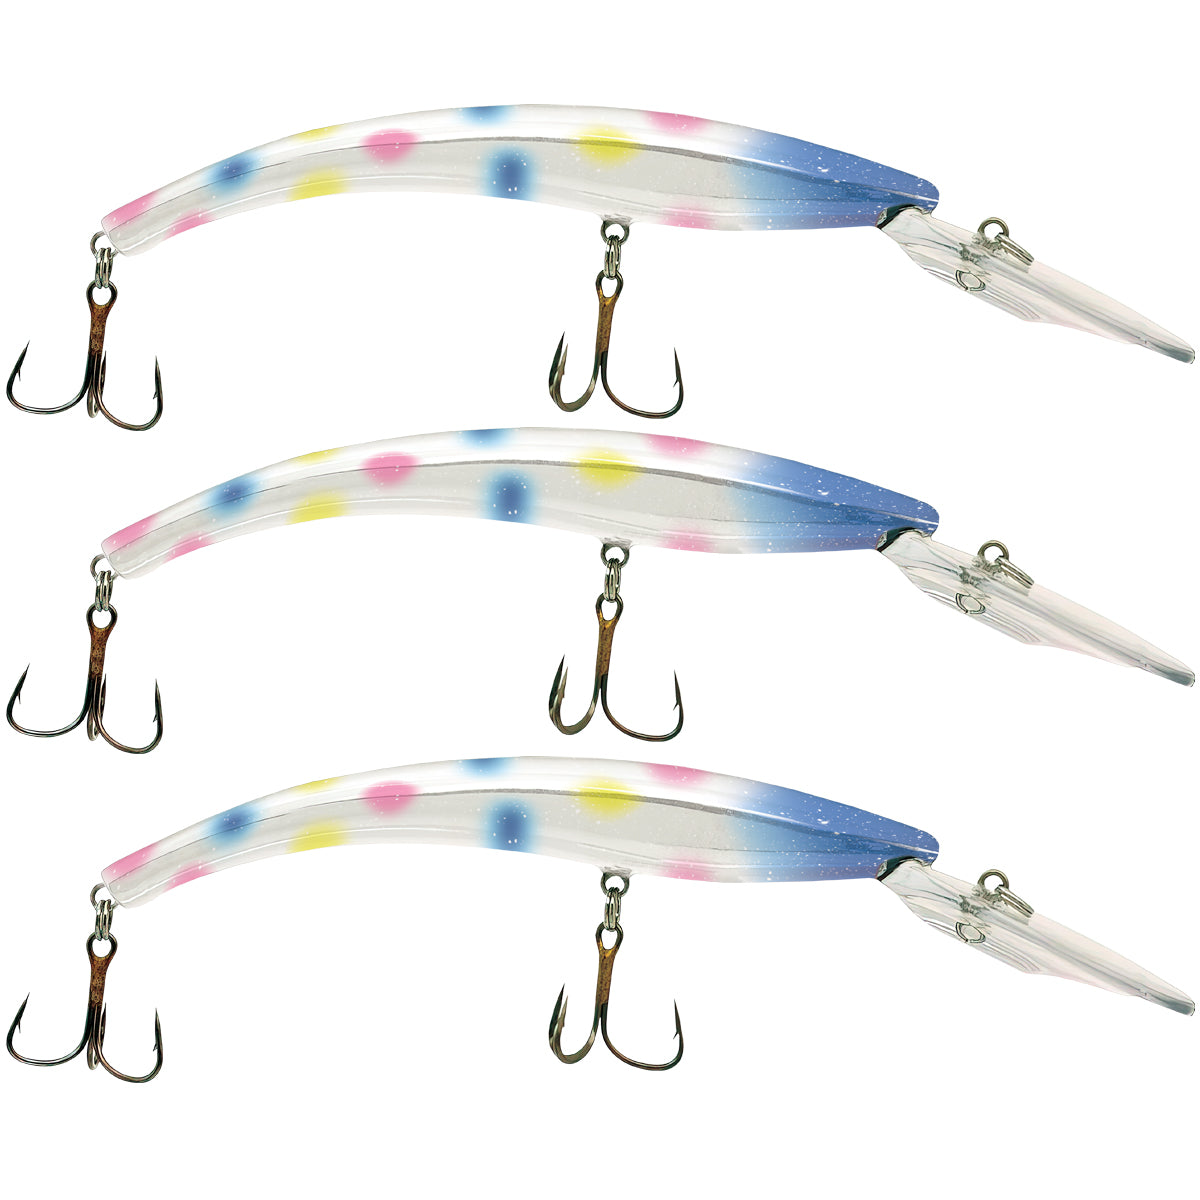 Reef Runner - 8003 Series - Deep Diver 3 Pack - Acme Tackle Company